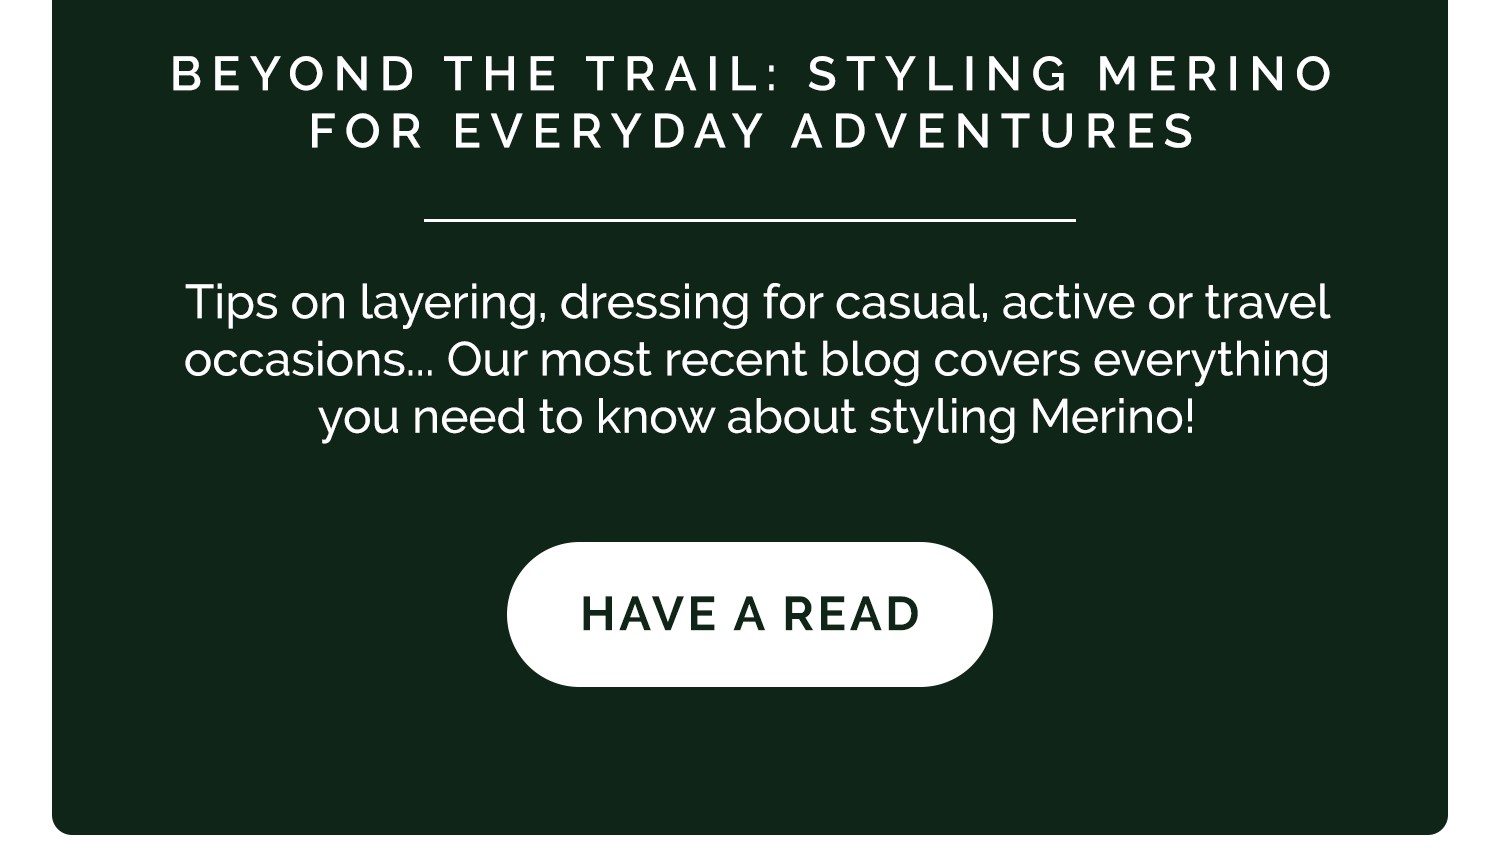 Beyond The Trail - Styling Merino for Everyday Adventures